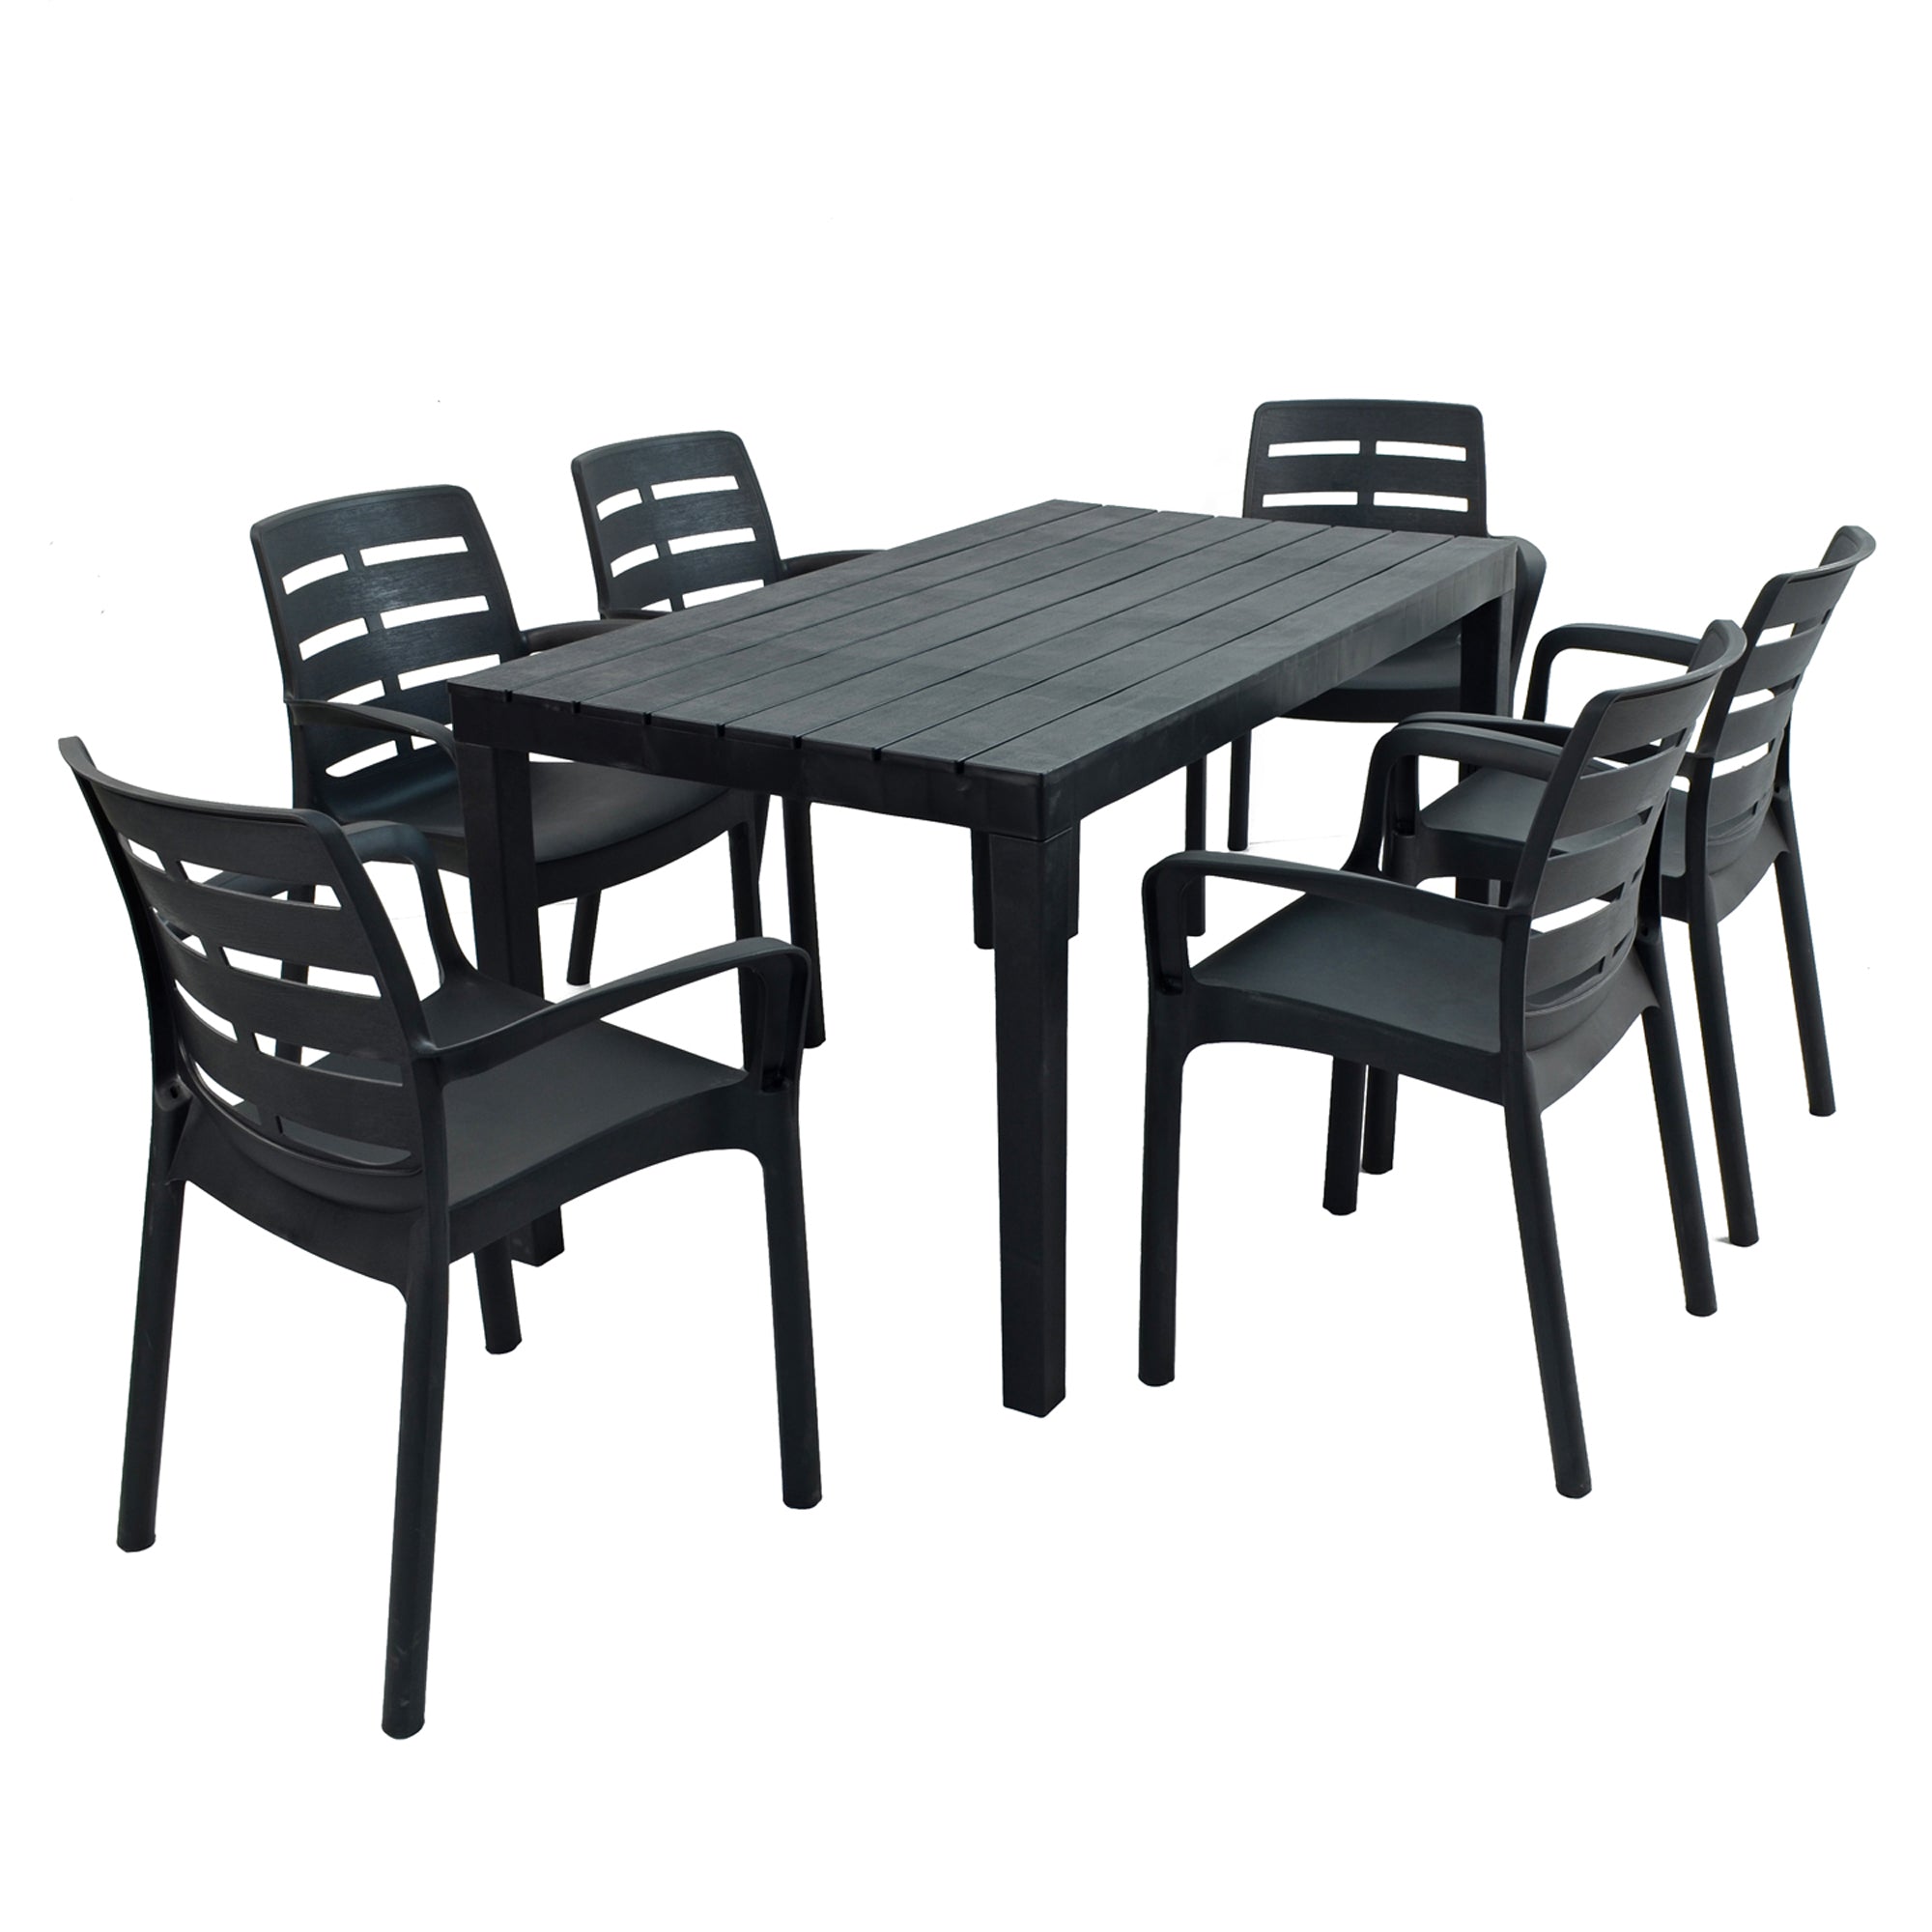 Trabella Roma Rectangular Table with 6 Siena Chairs Set Anthracite Dining Sets Trabella   